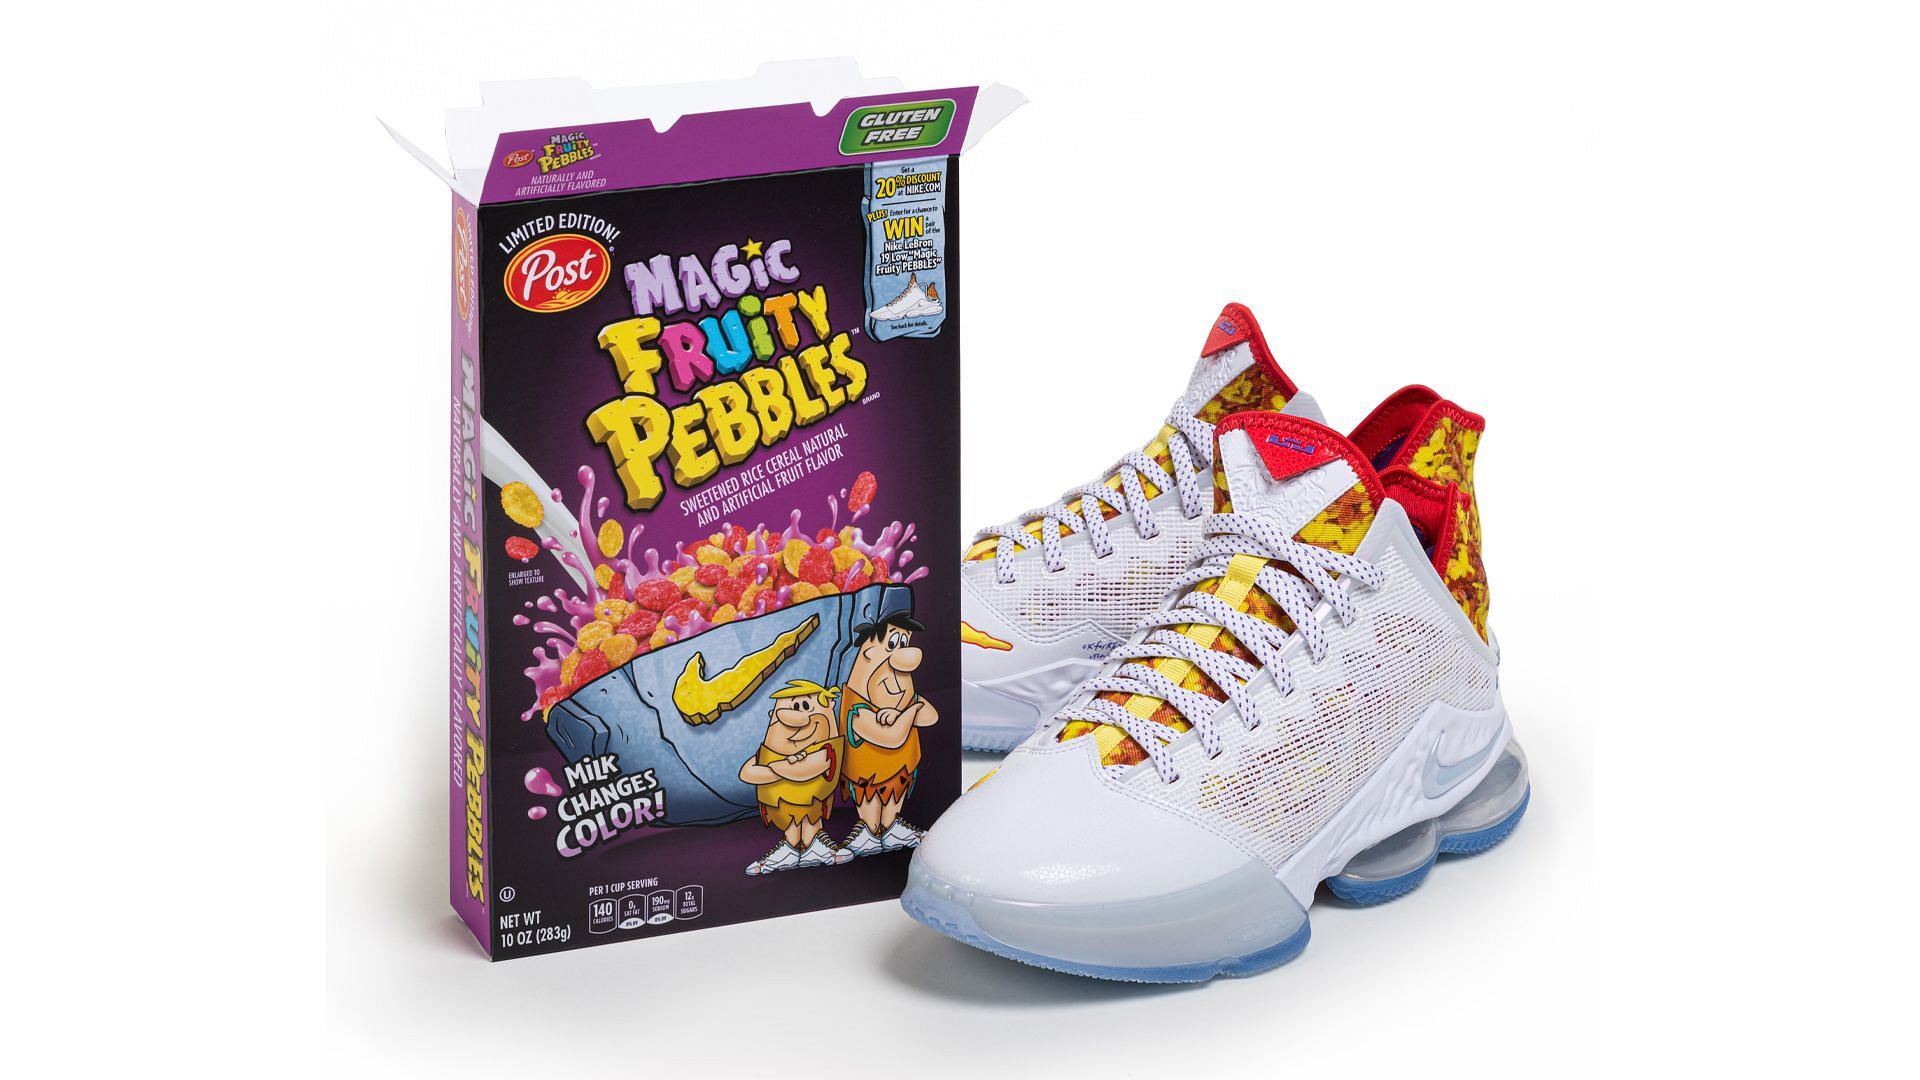 LeBron James&#039; shoes were released on National Cereal Day (Image via Post Consumer Brands).